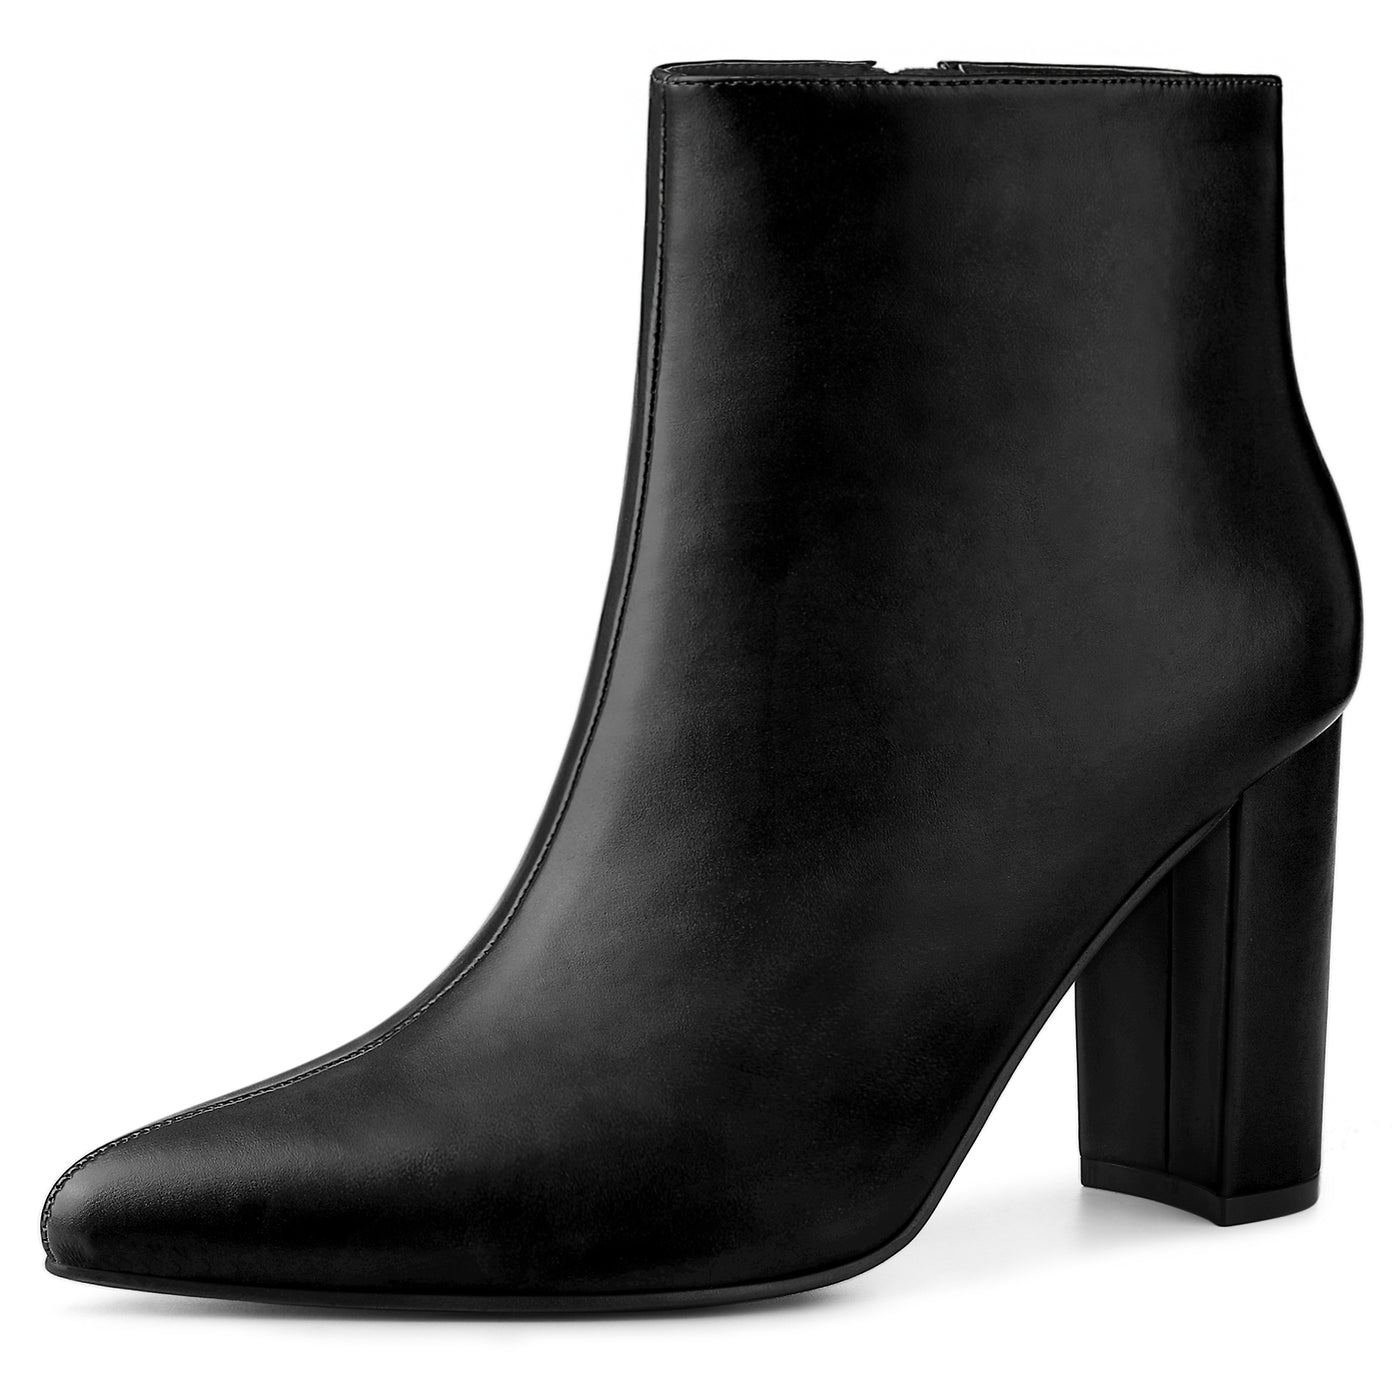 Allegra K Pointed Toe Zipper Chunky High Heel Ankle Boots